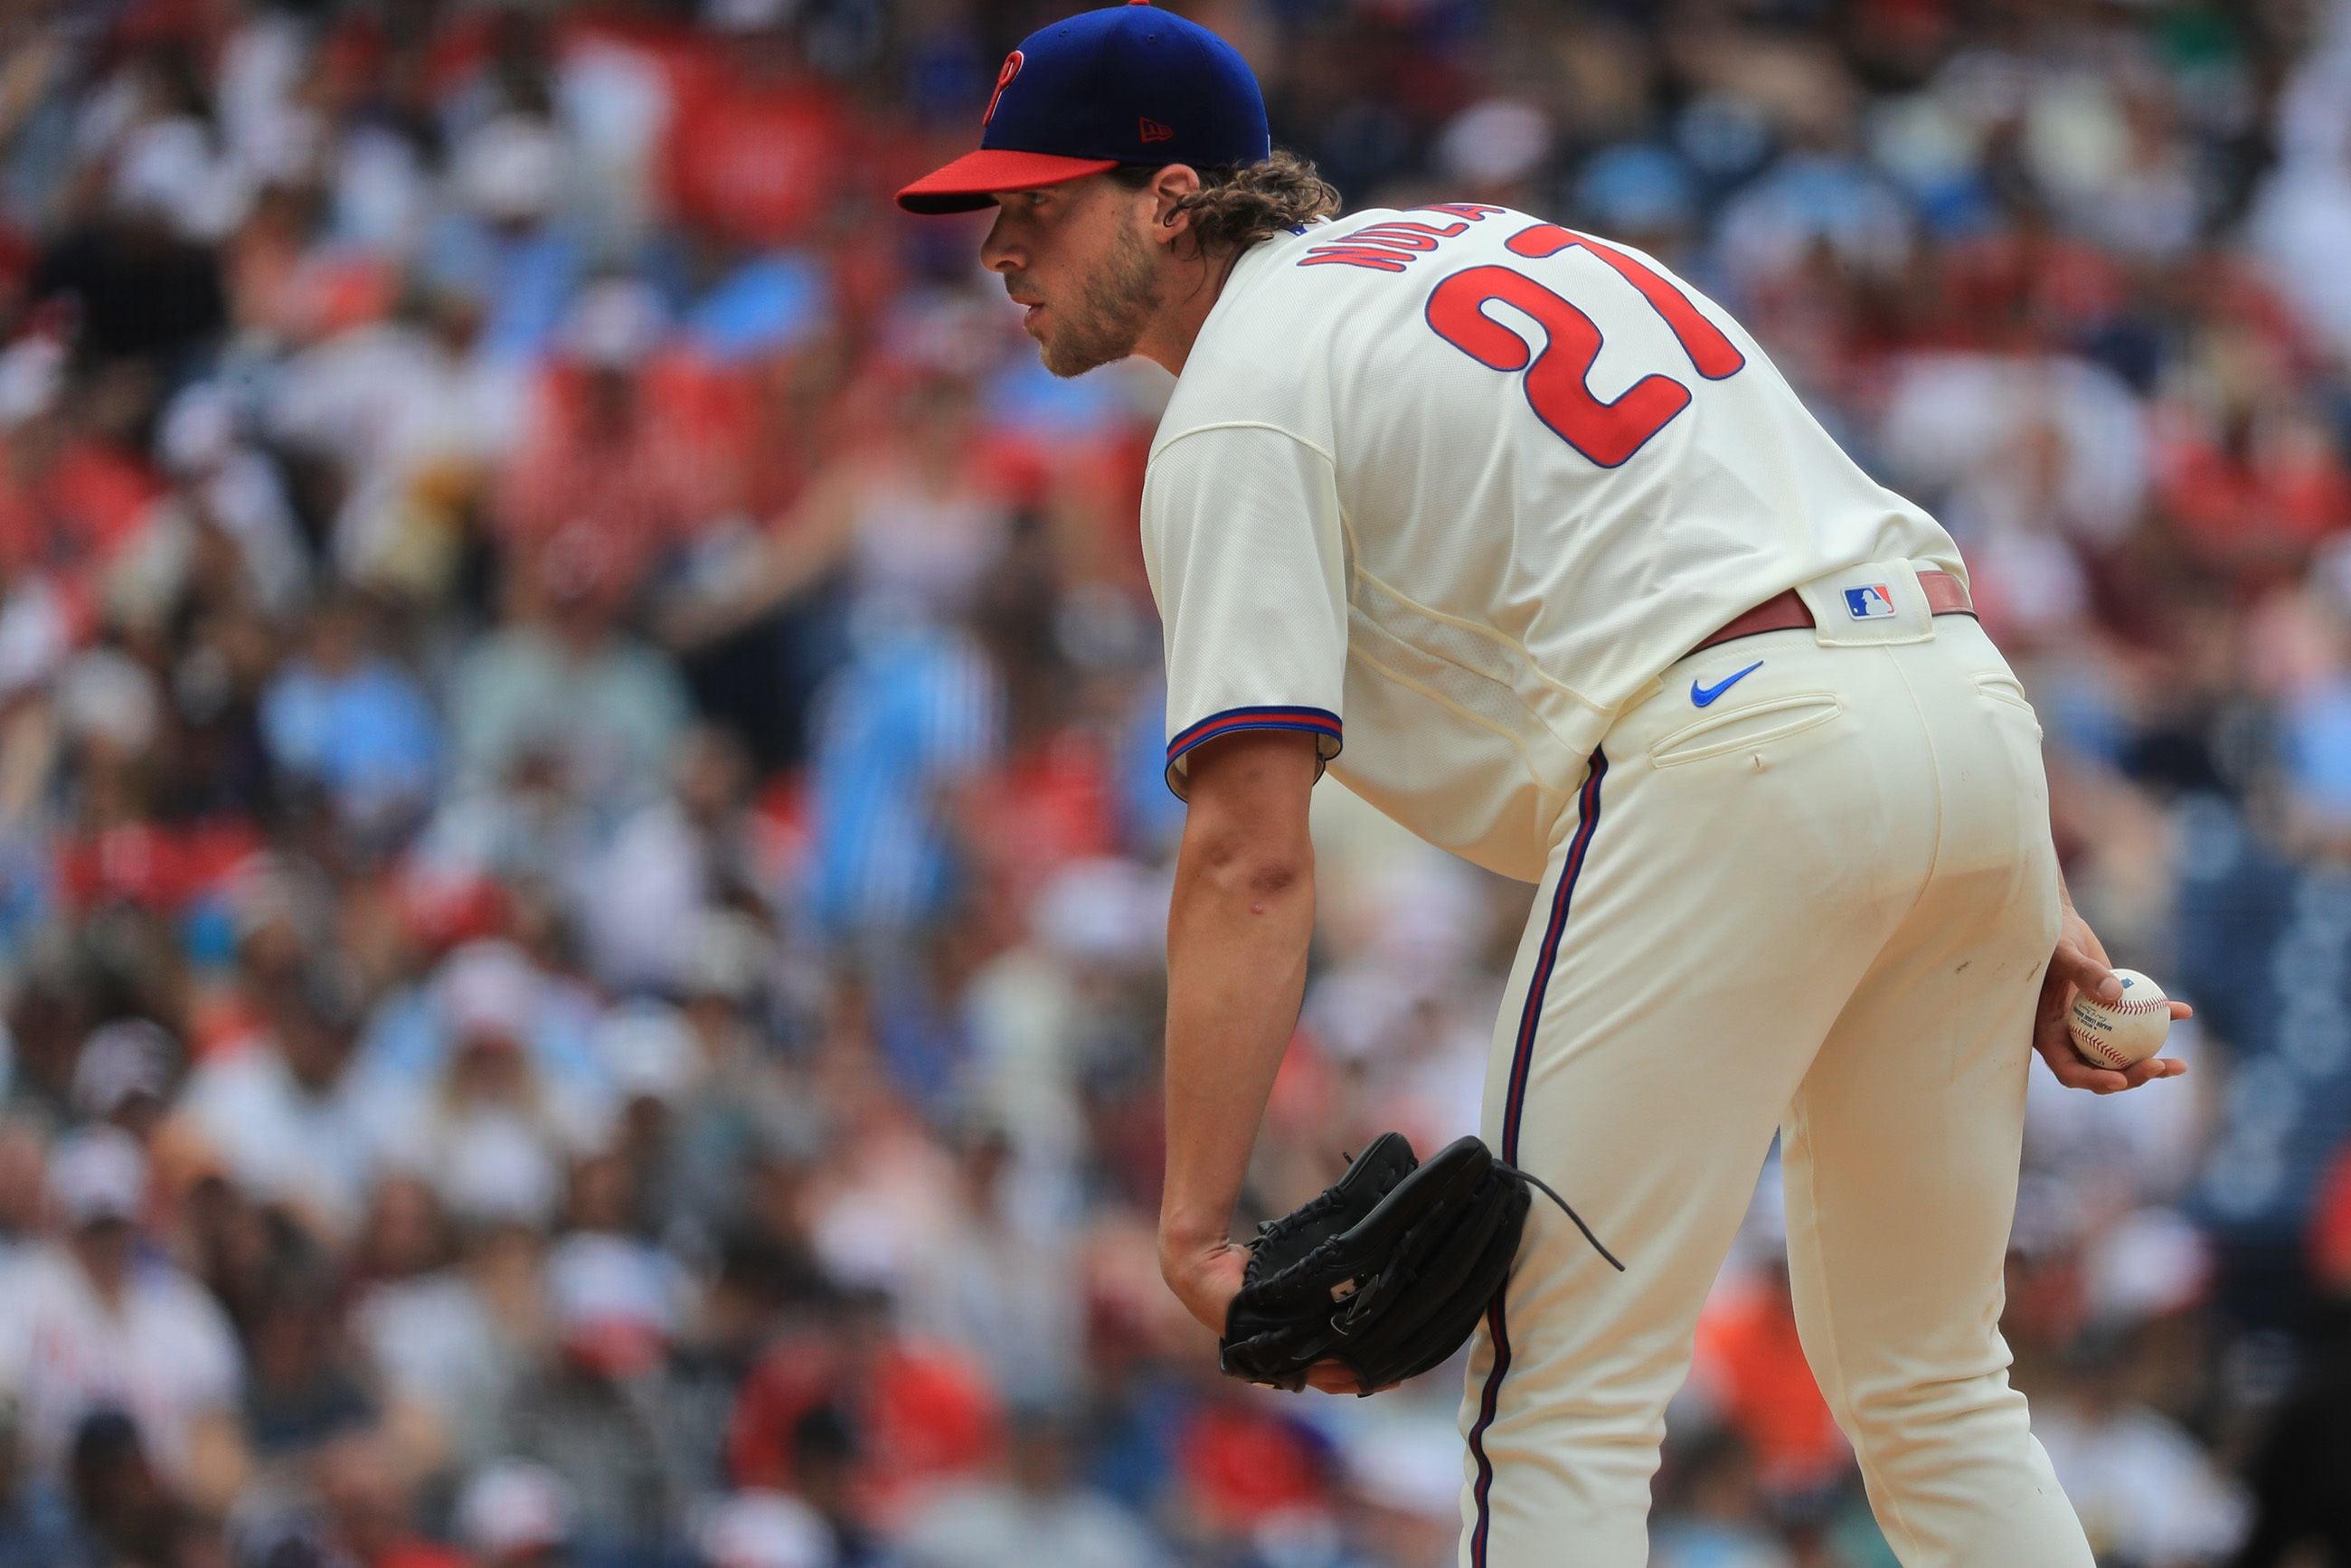 Brotherly love? Not so much between Aaron Nola and Austin Nola